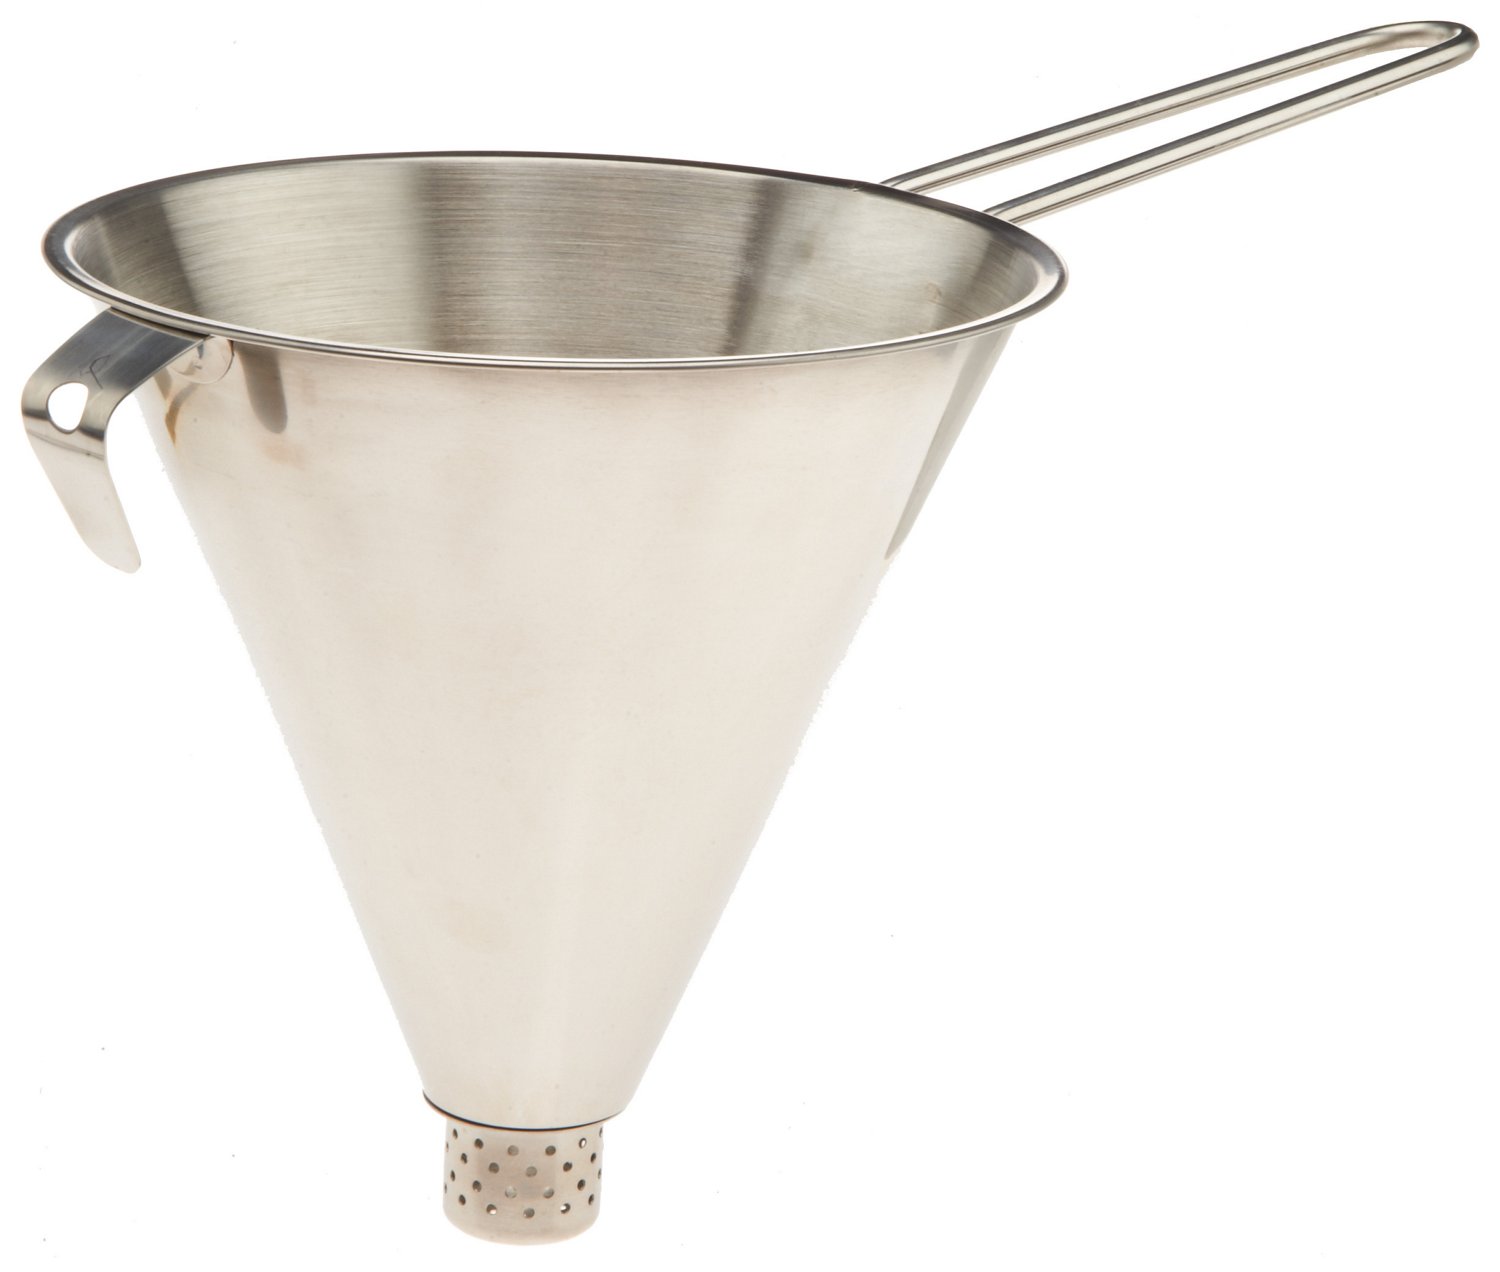 2 layers protein funnel with metal